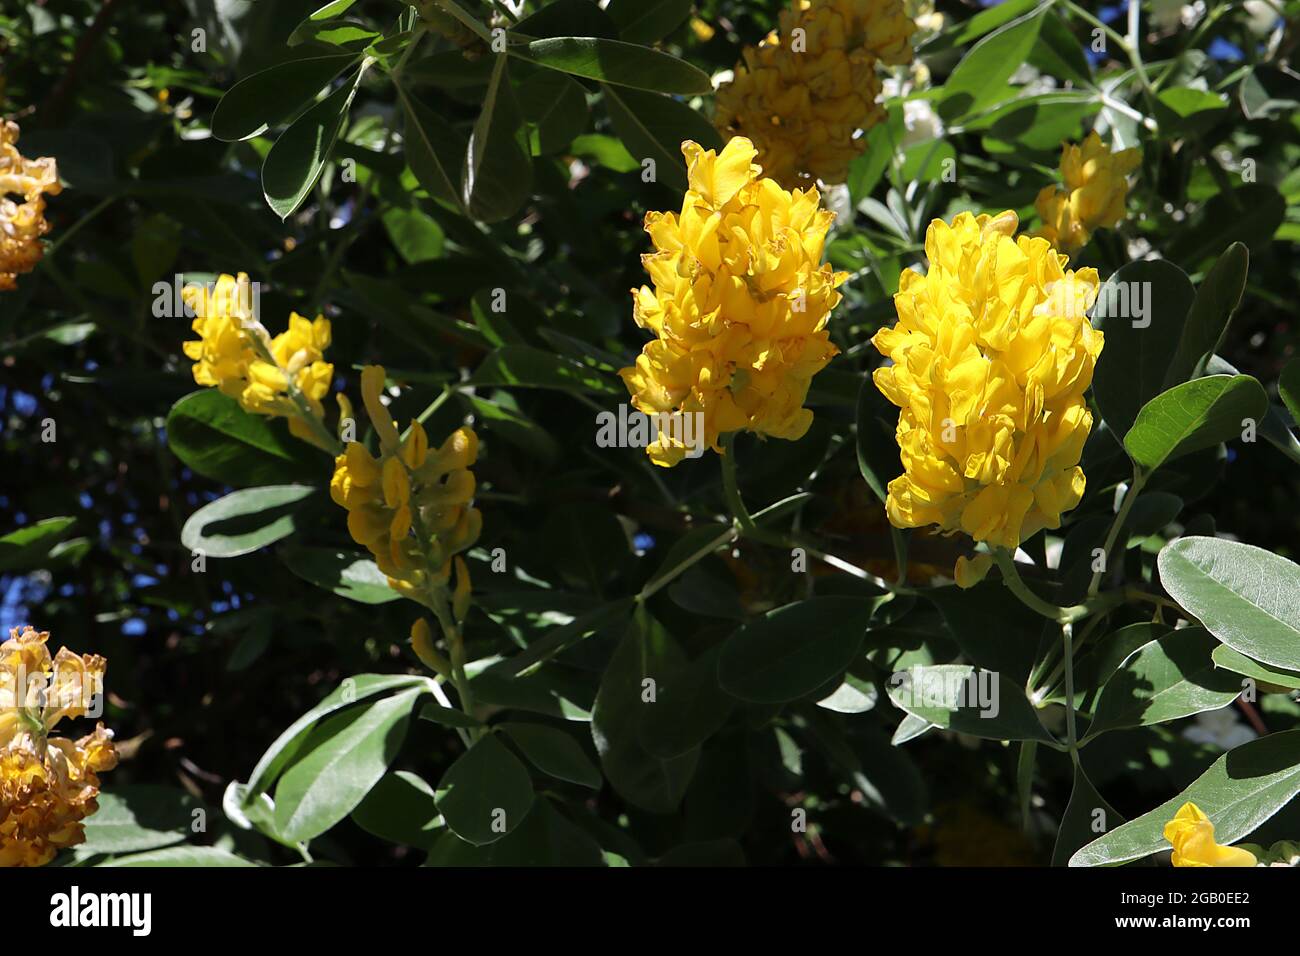 Argyrocytisus battandieri  pineapple / Moroccan broom – tight cylindrical clusters of golden yellow pea-shaped flowers,  June, England, UK Stock Photo